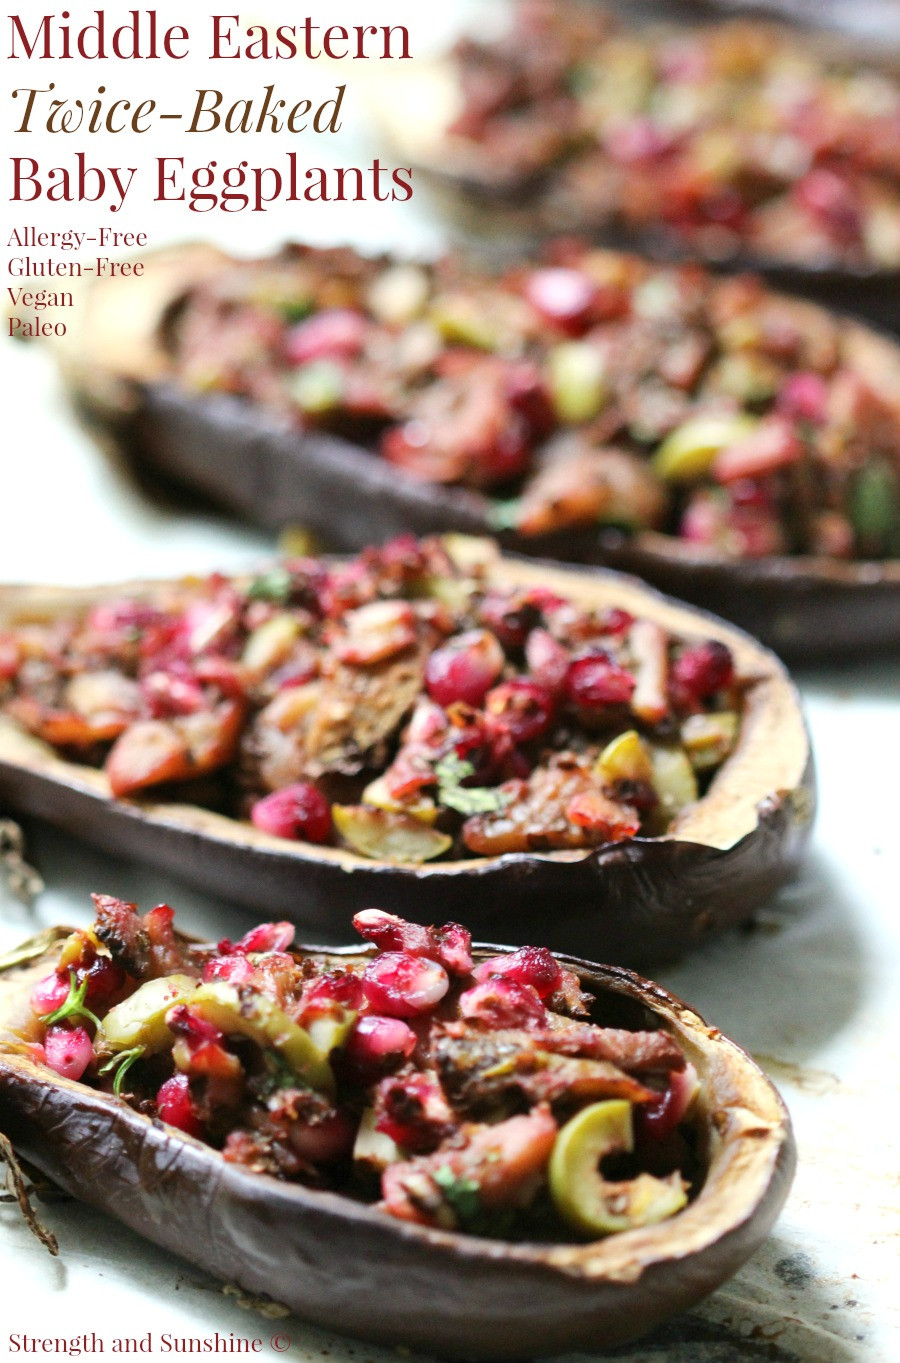 Middle Eastern Vegetarian Recipes
 Middle Eastern Twice Baked Baby Eggplants